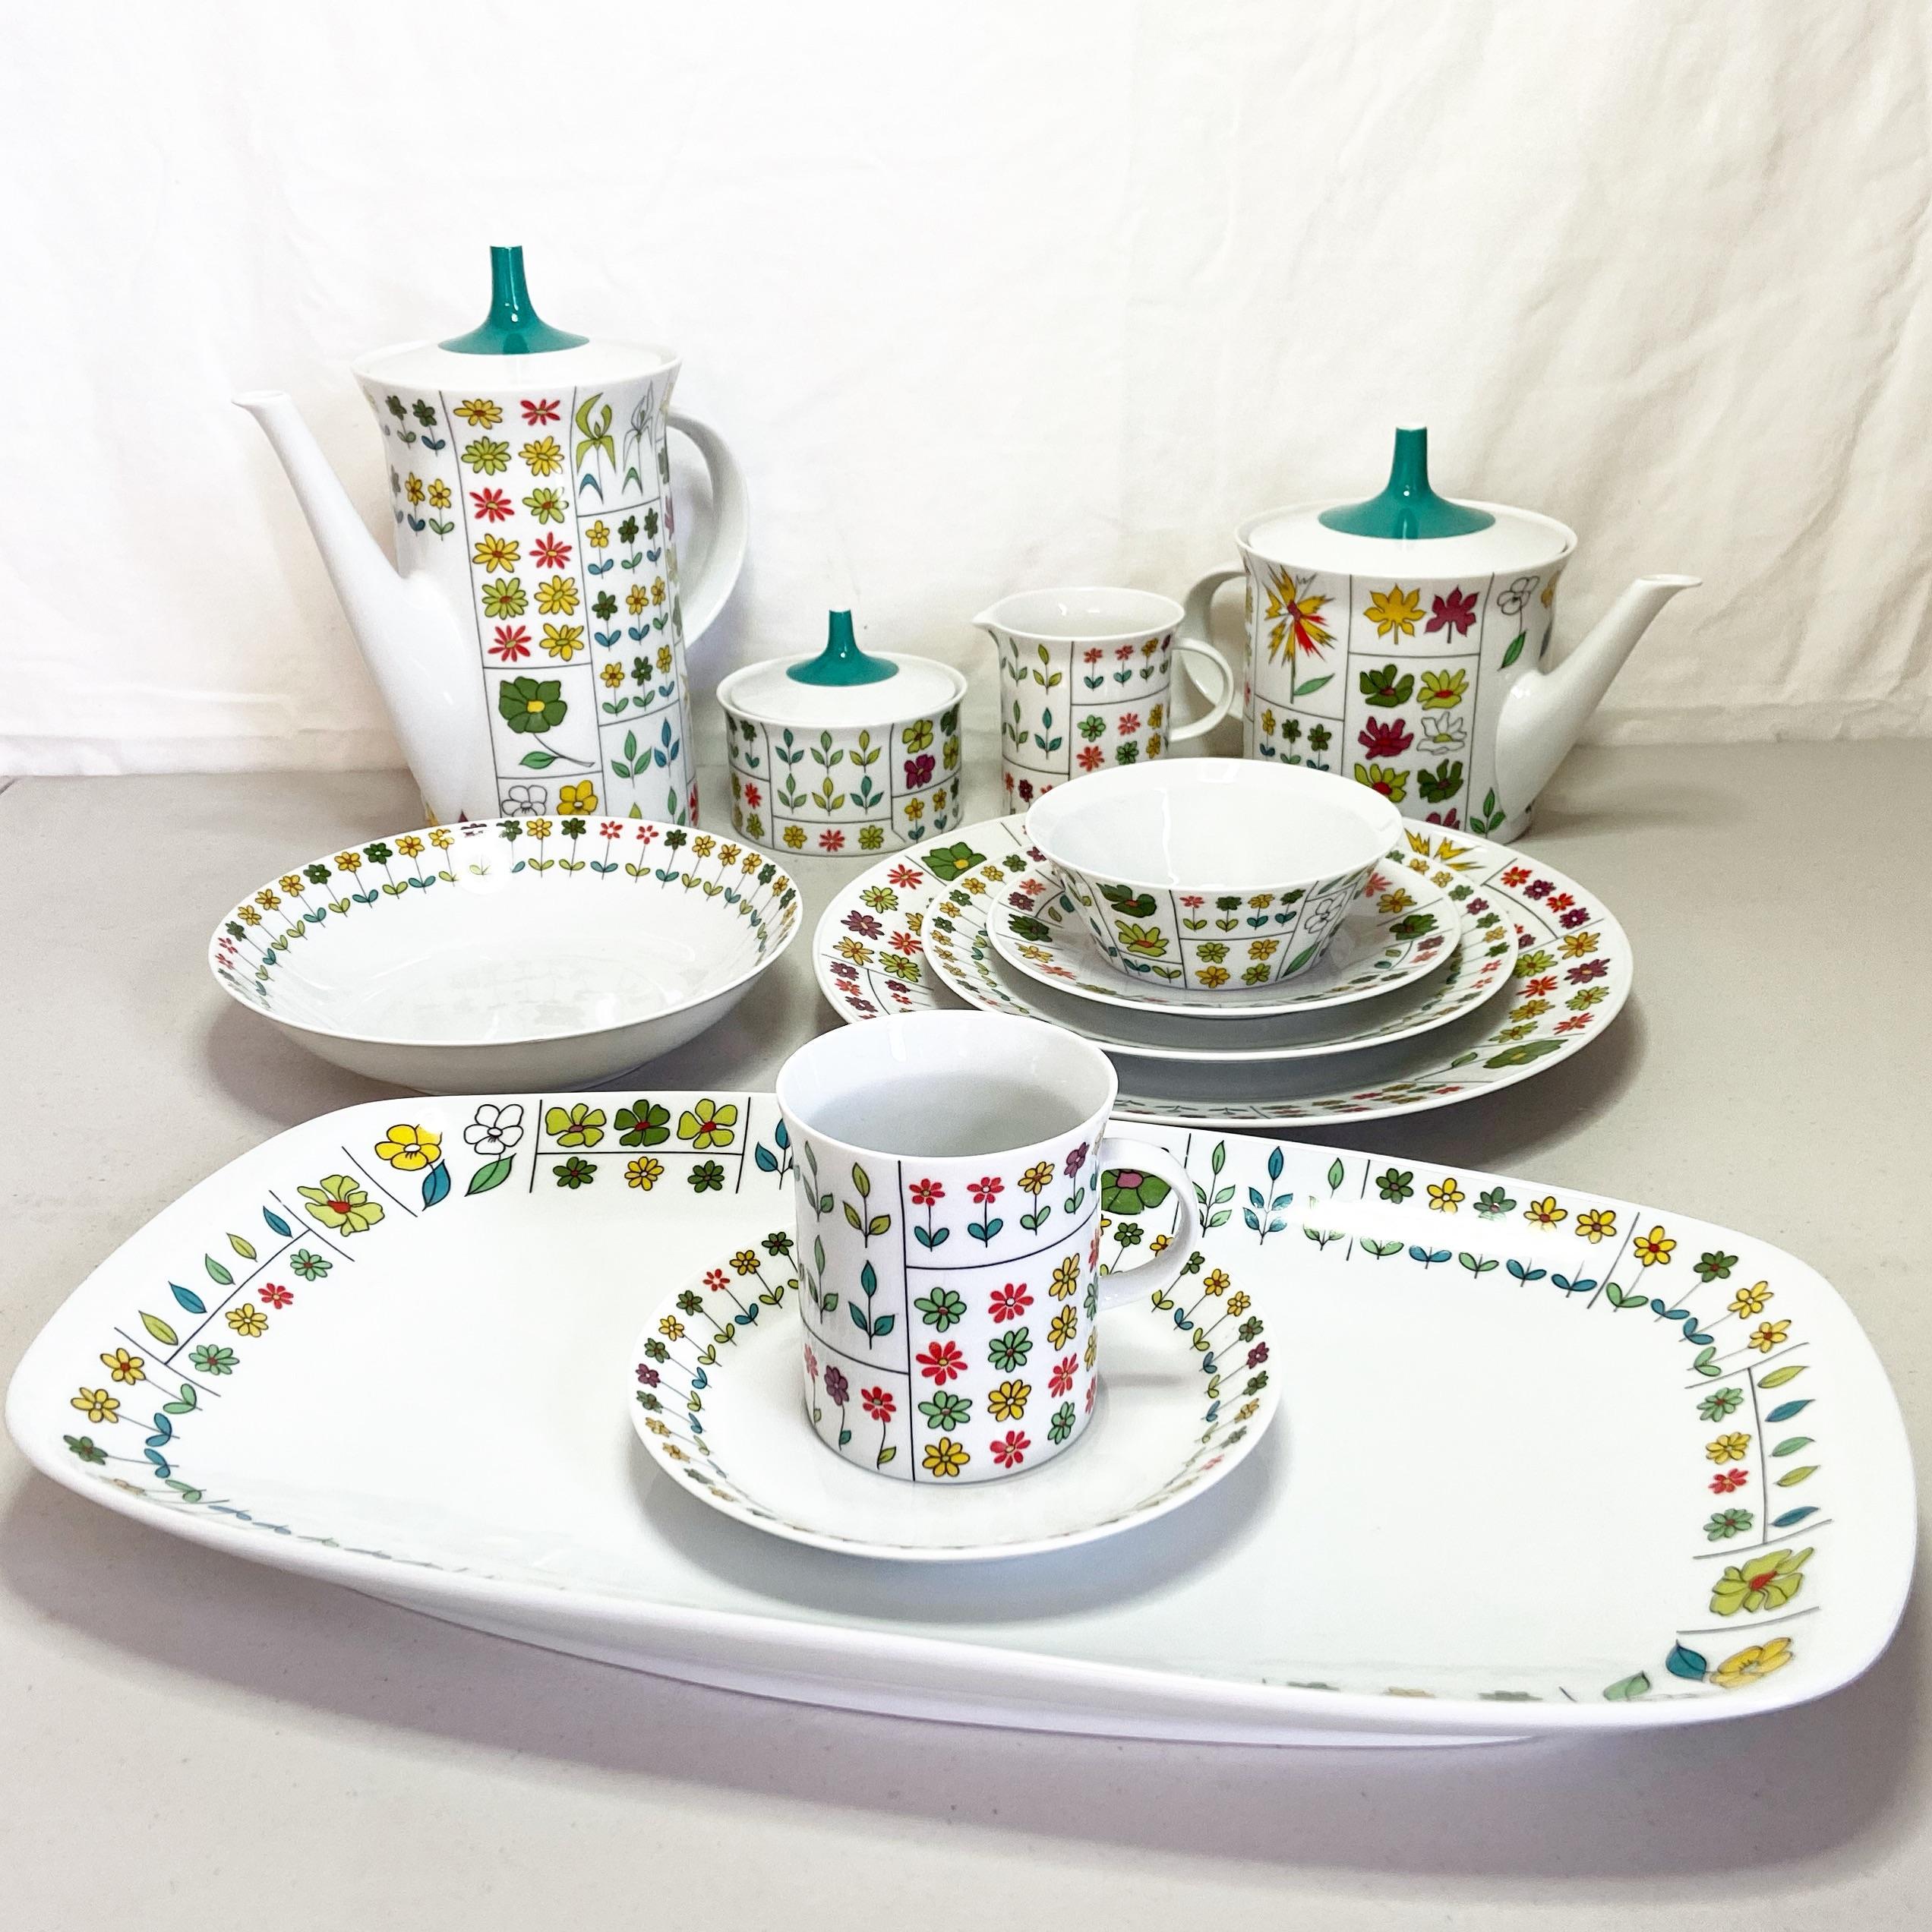 German Collection of Piemonte Dinnerware by Emilio Pucci for Rosenthal Studio Line